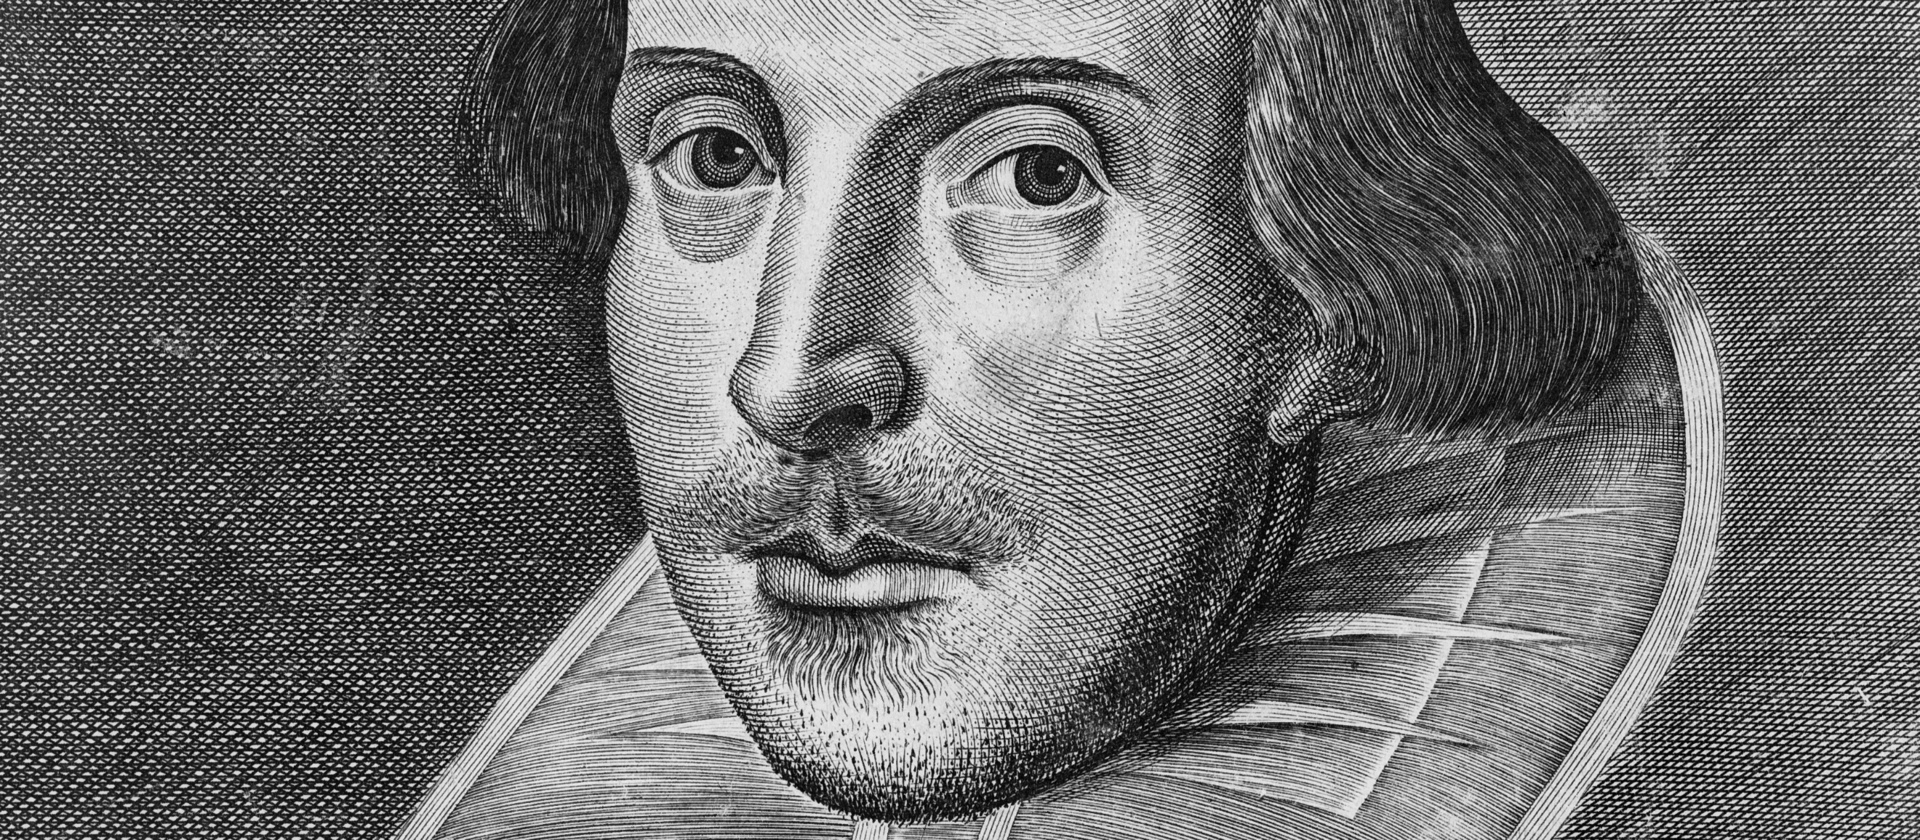 Shakespeare droeshout 1623